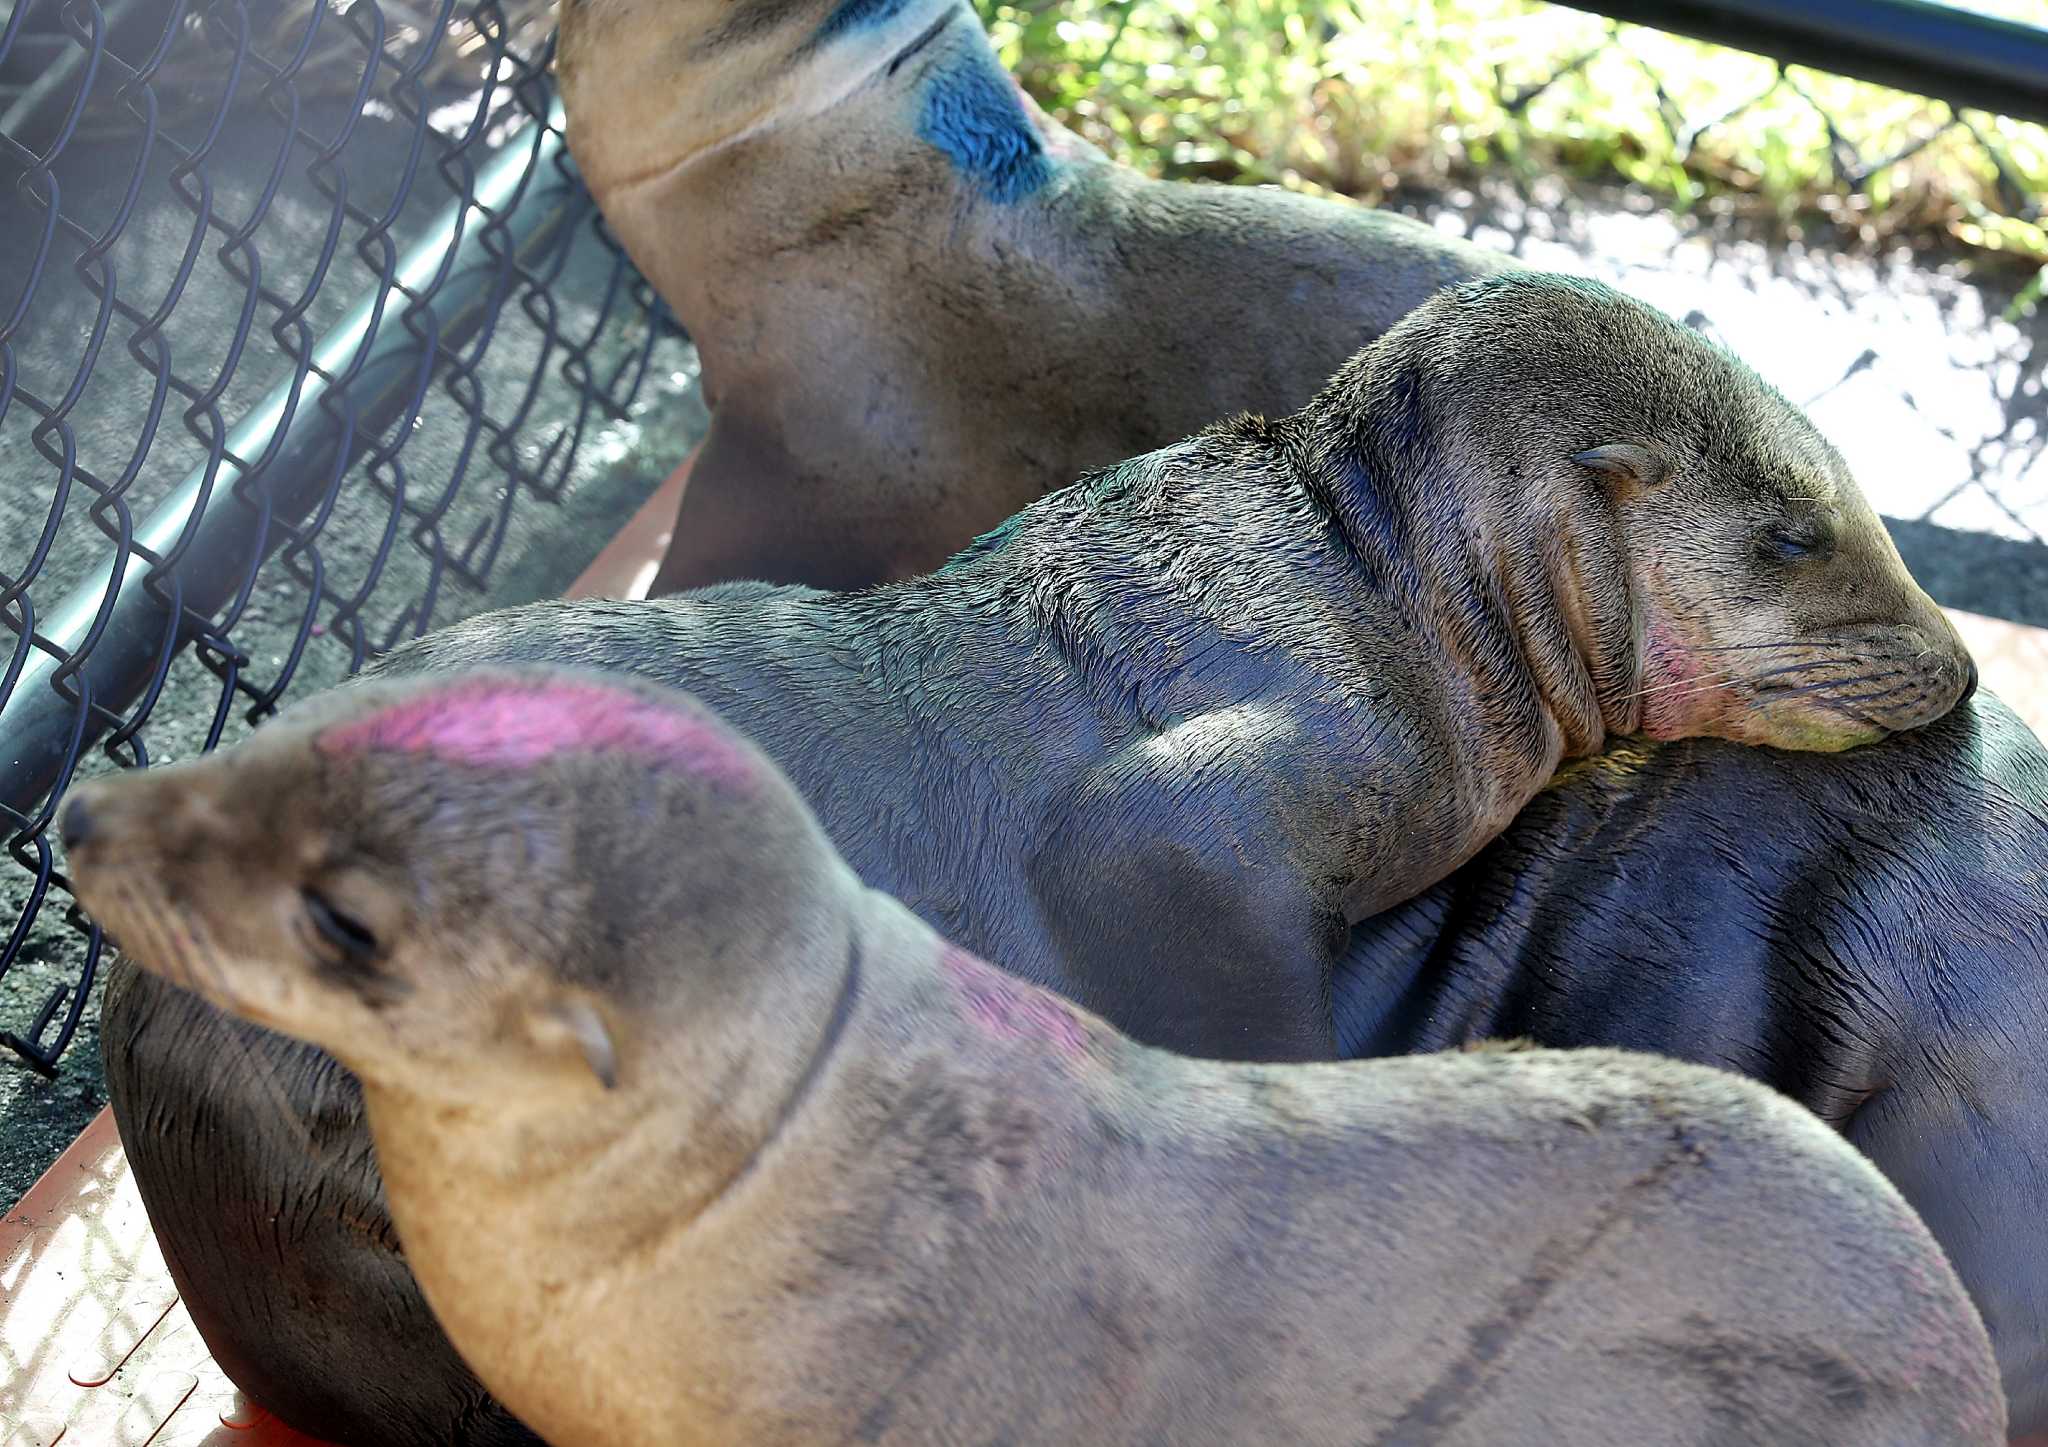 Sea lions desperate for nourishment dying off in alarming numbers on